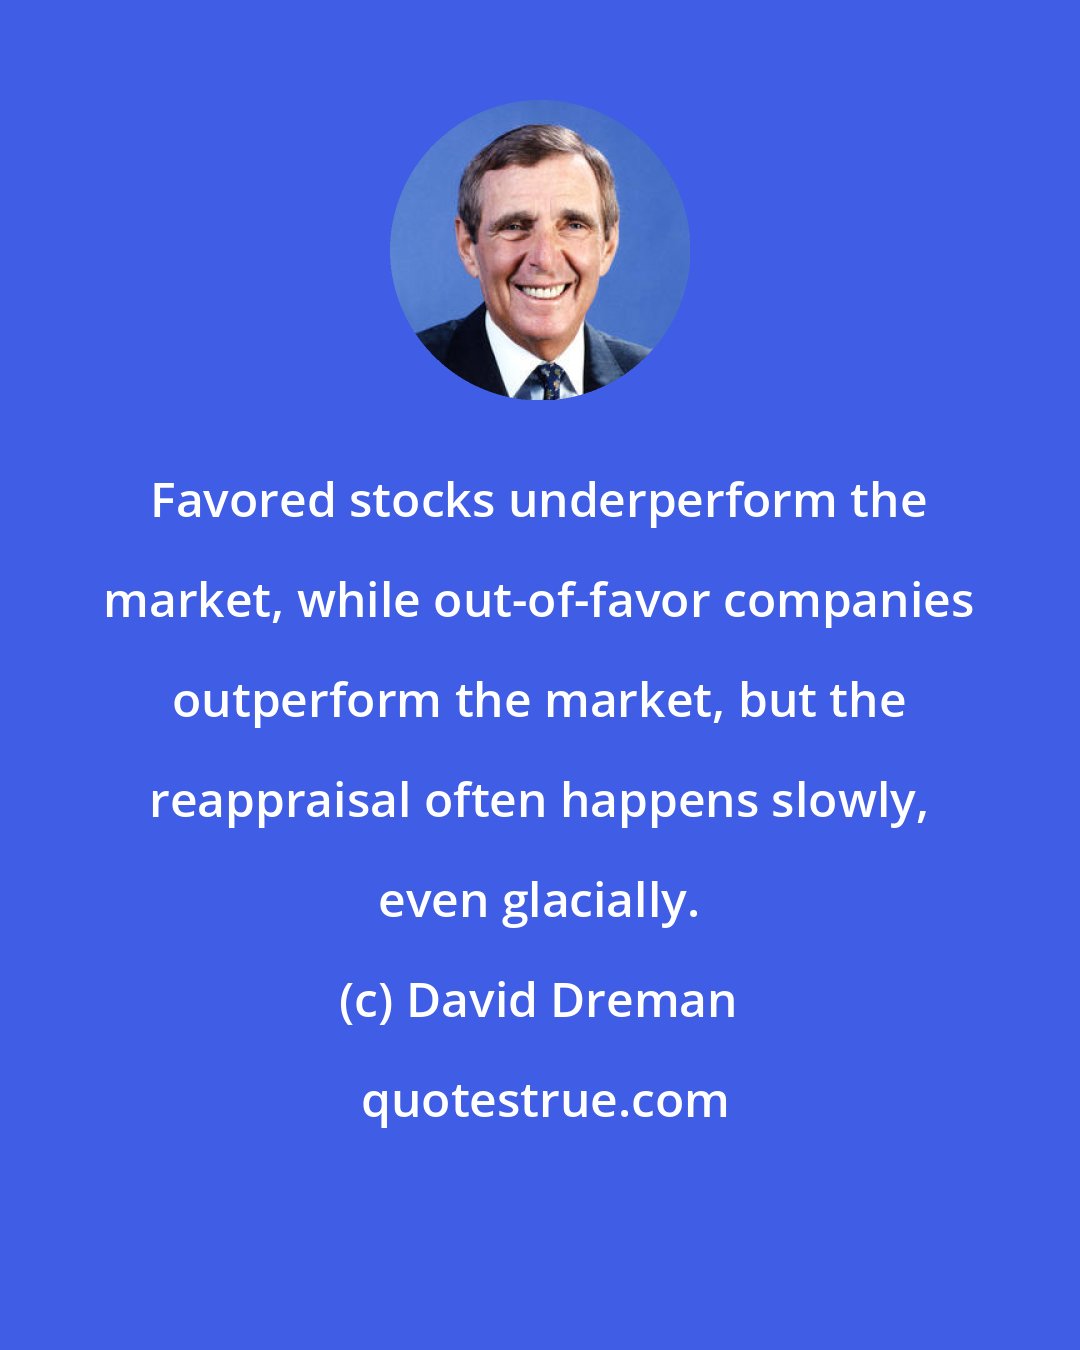 David Dreman: Favored stocks underperform the market, while out-of-favor companies outperform the market, but the reappraisal often happens slowly, even glacially.